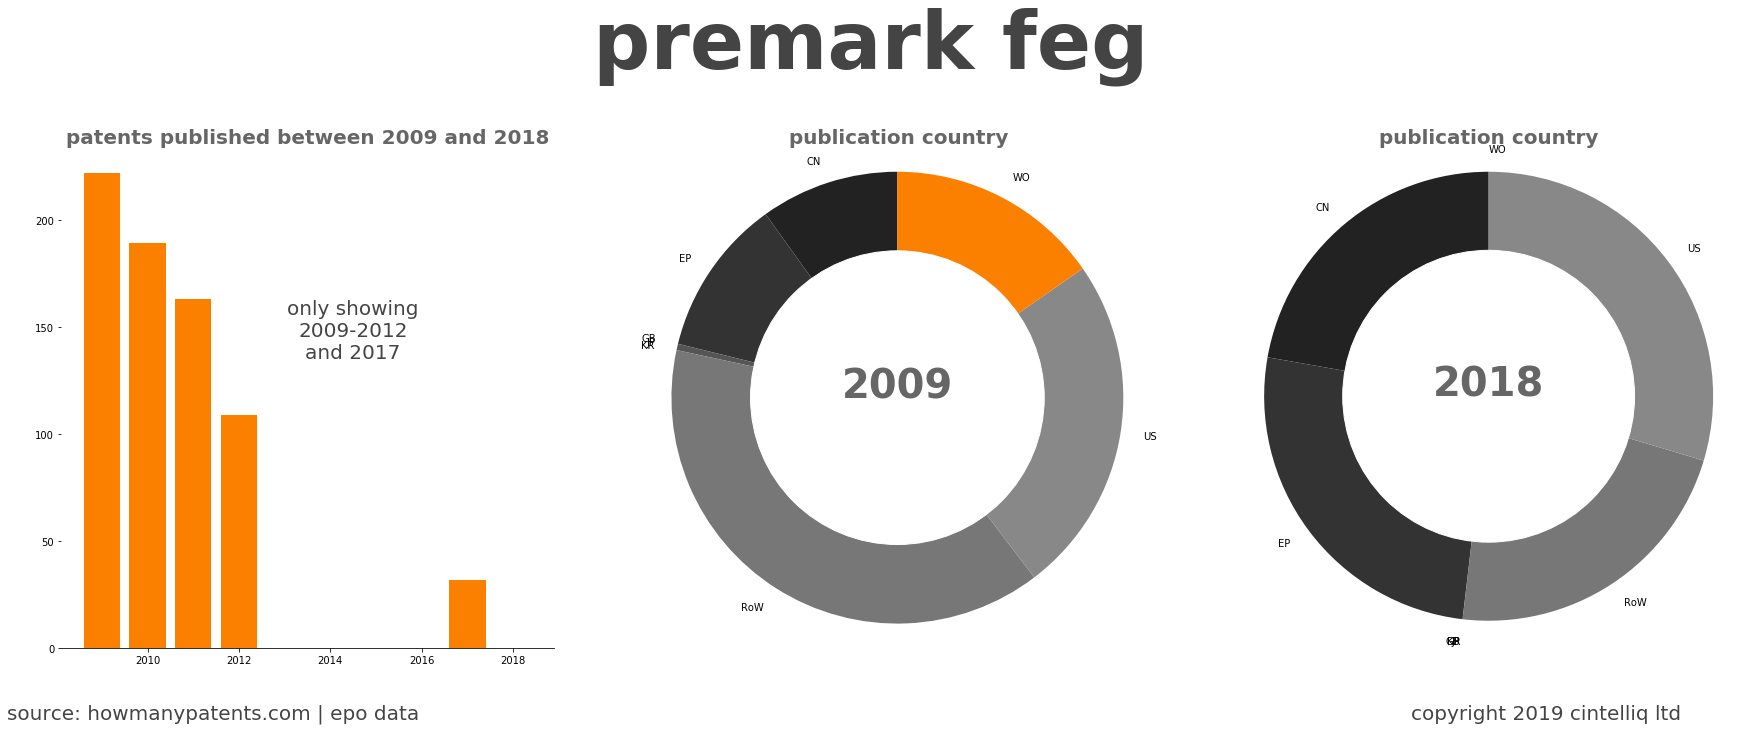 summary of patents for Premark Feg